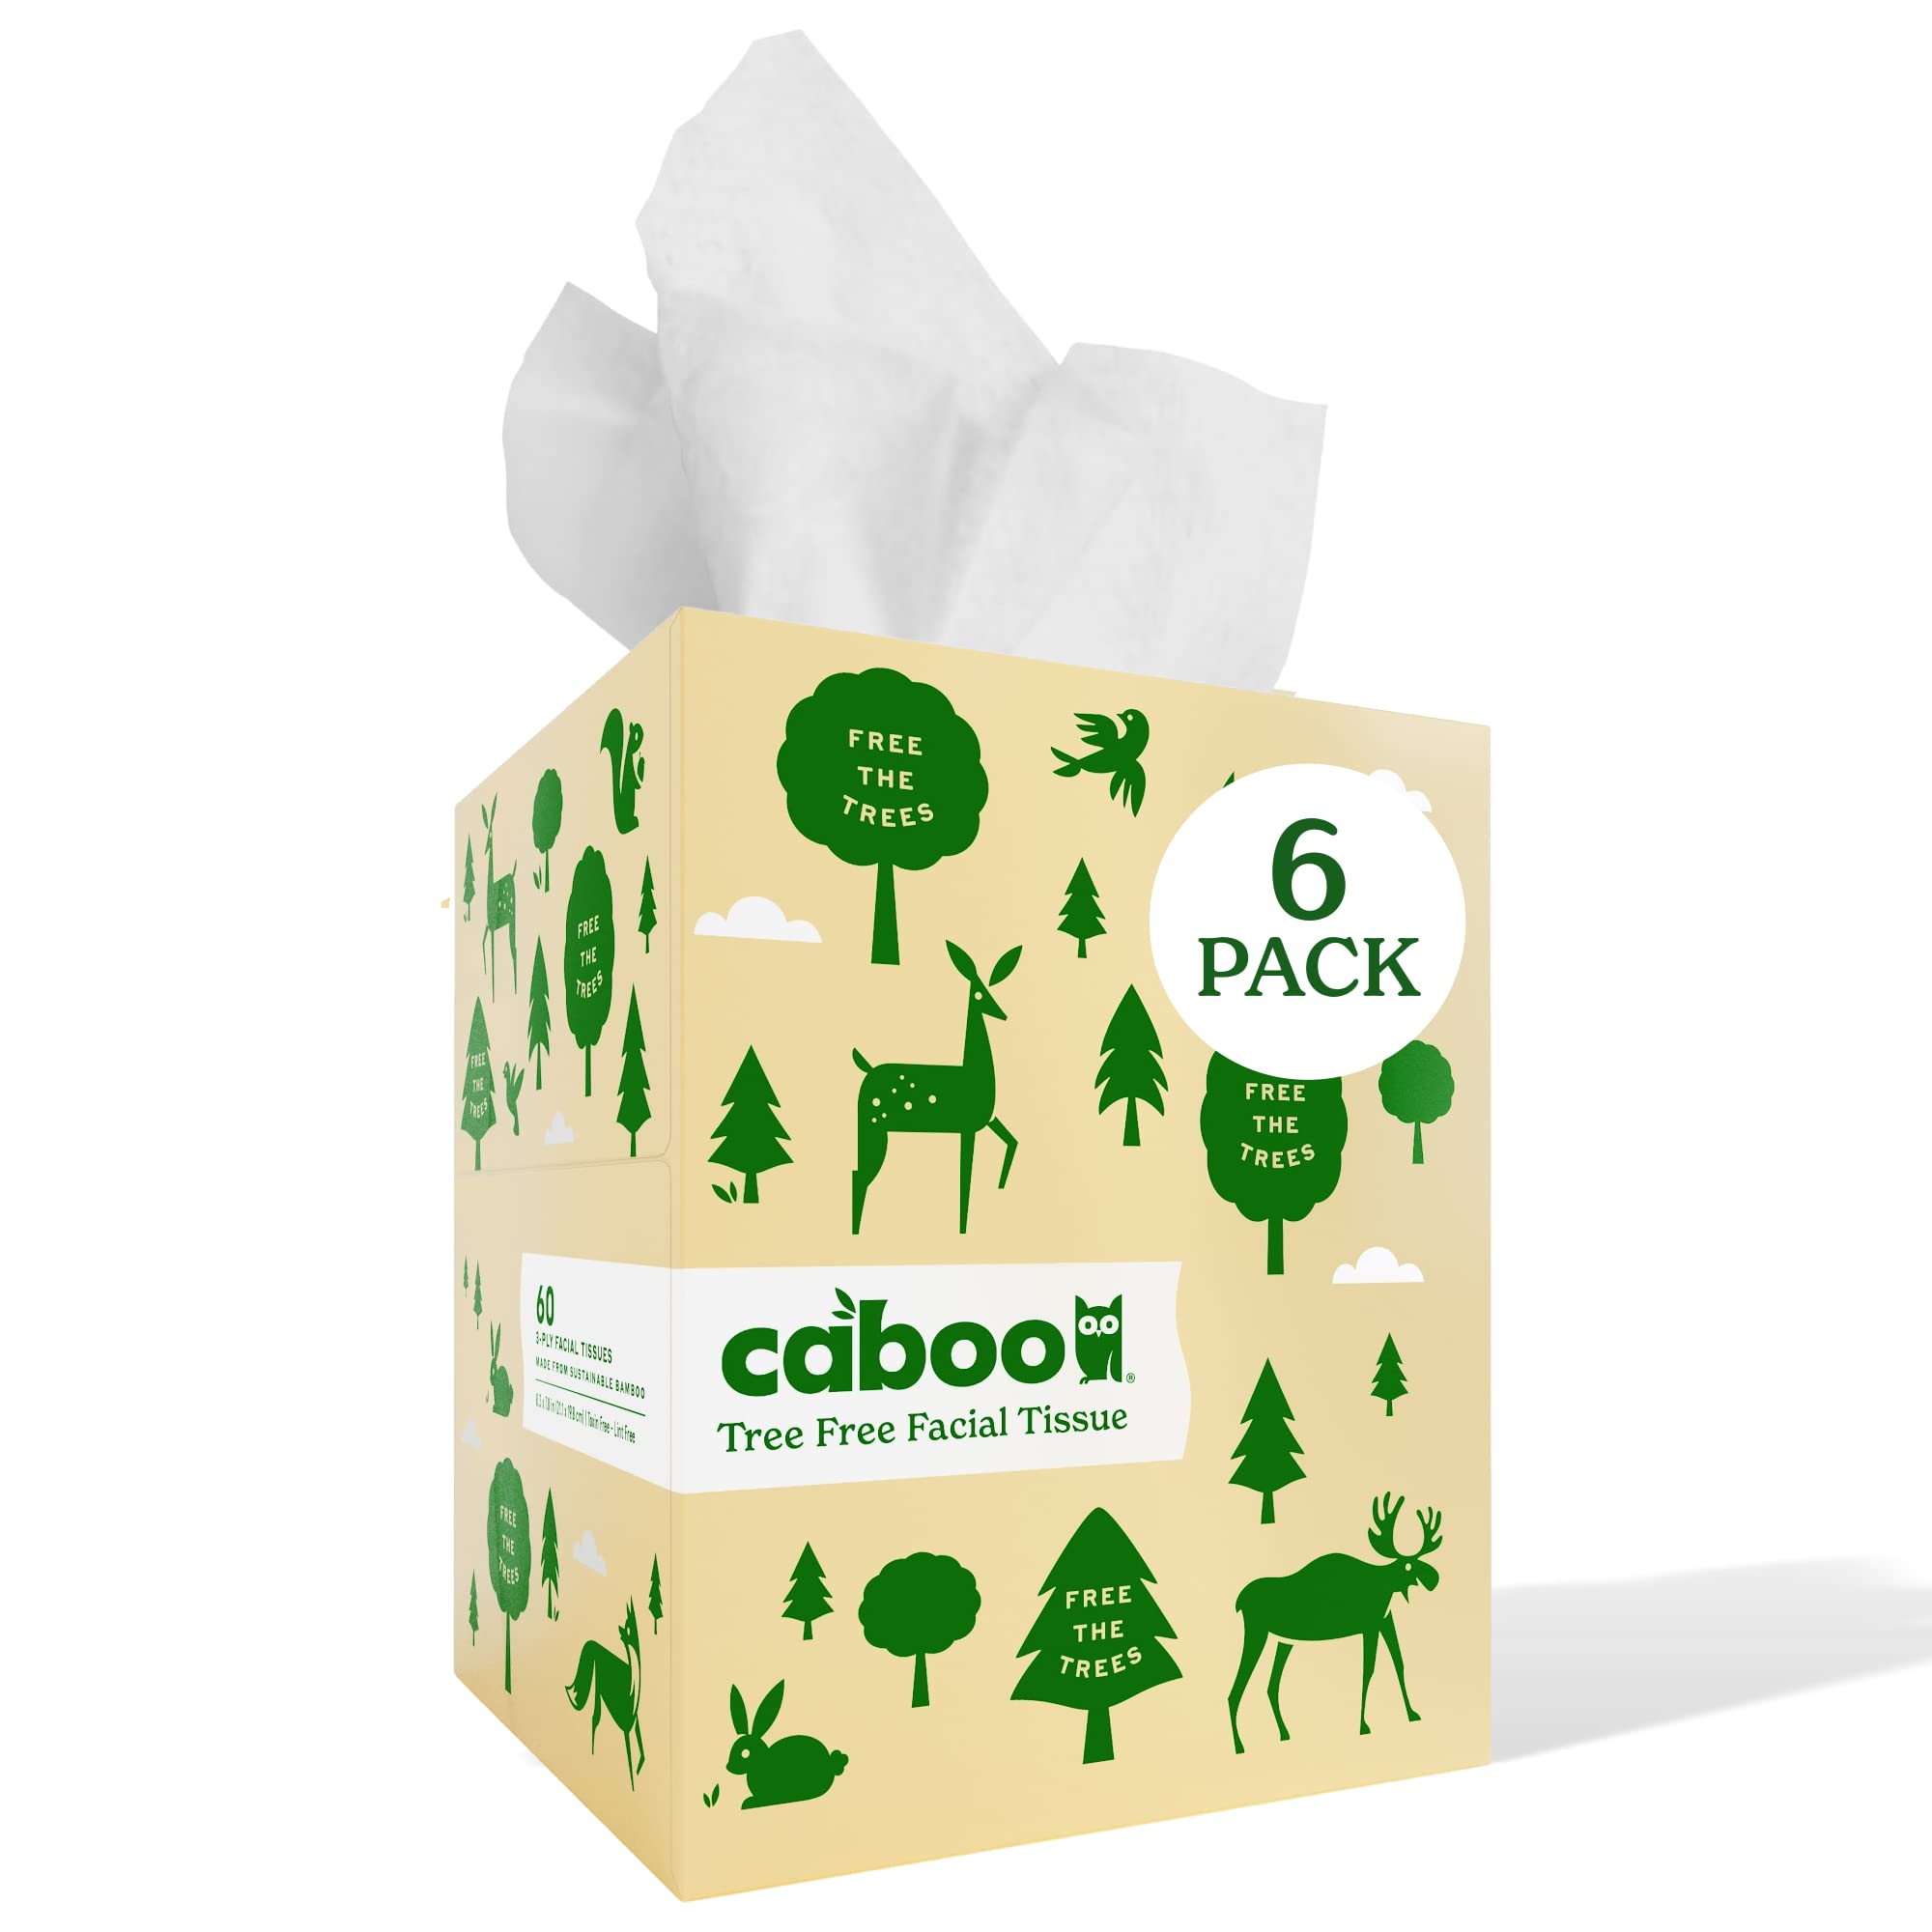 Tree-free Bamboo Toilet Paper - Caboo